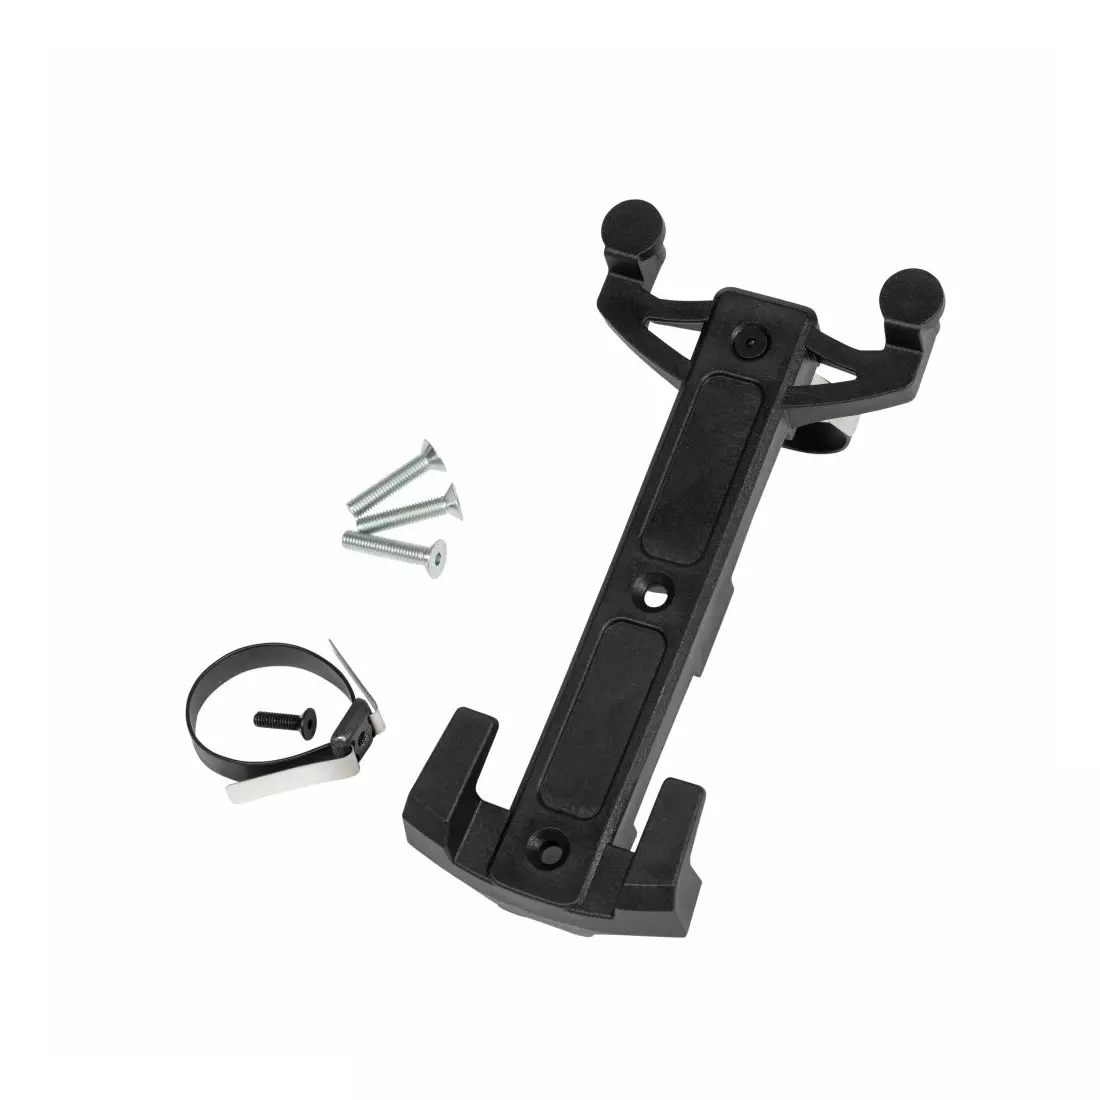 ORTLIEB zestaw mocujący do sakw MOUNTING SET FOR QLS FRONT BAGS (FORK-PACK) 